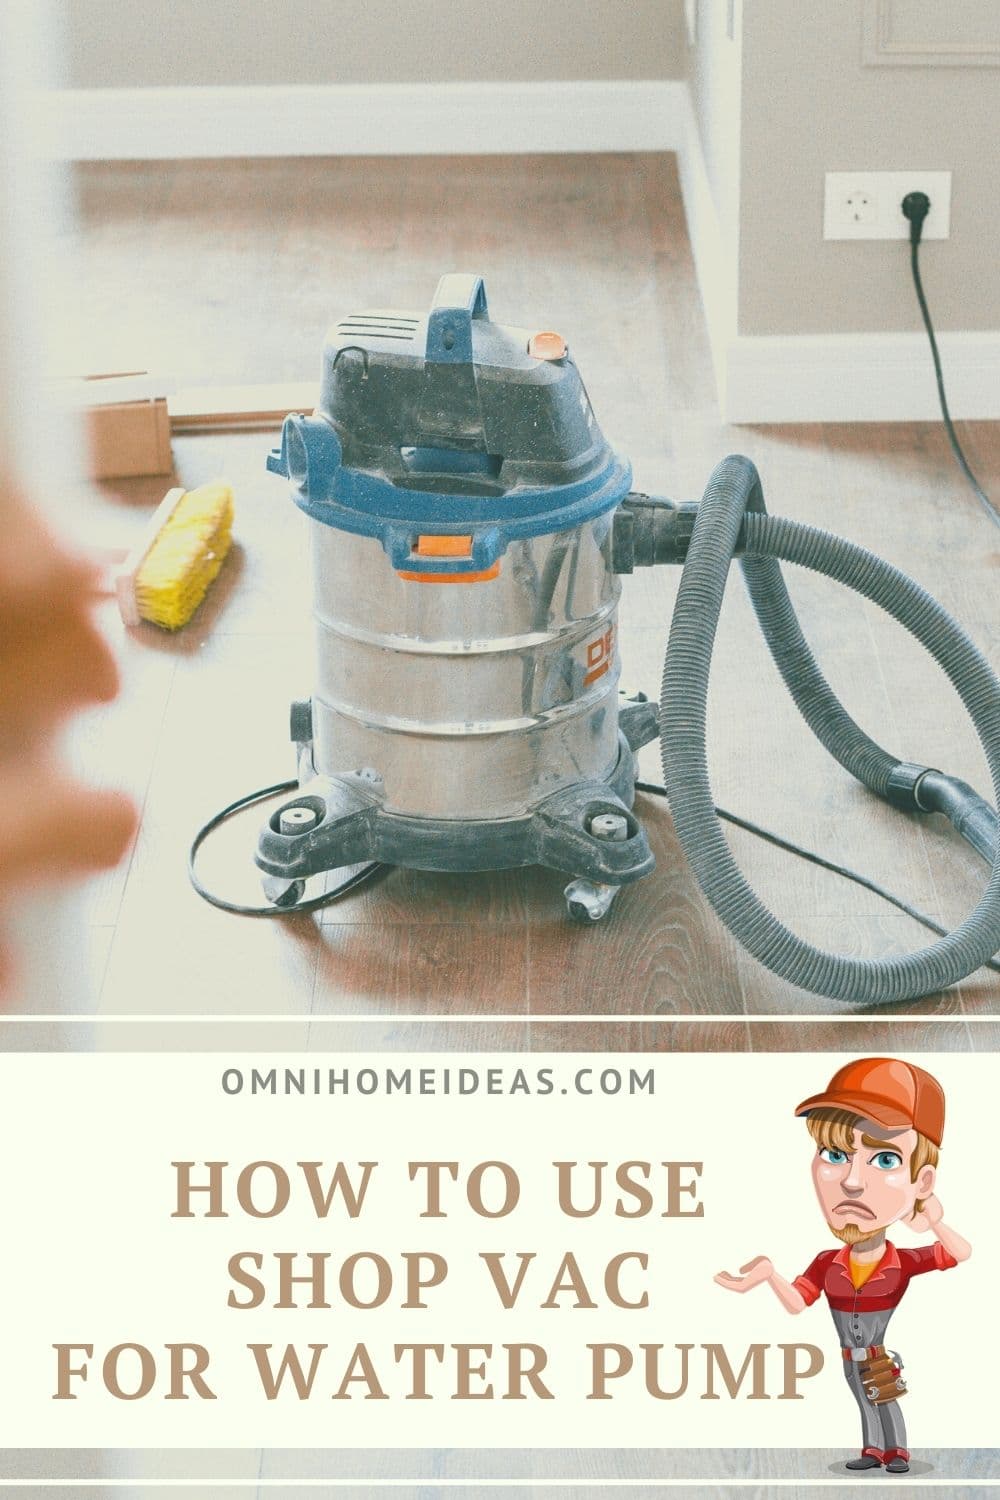 How to Use a Shop Vac for Water